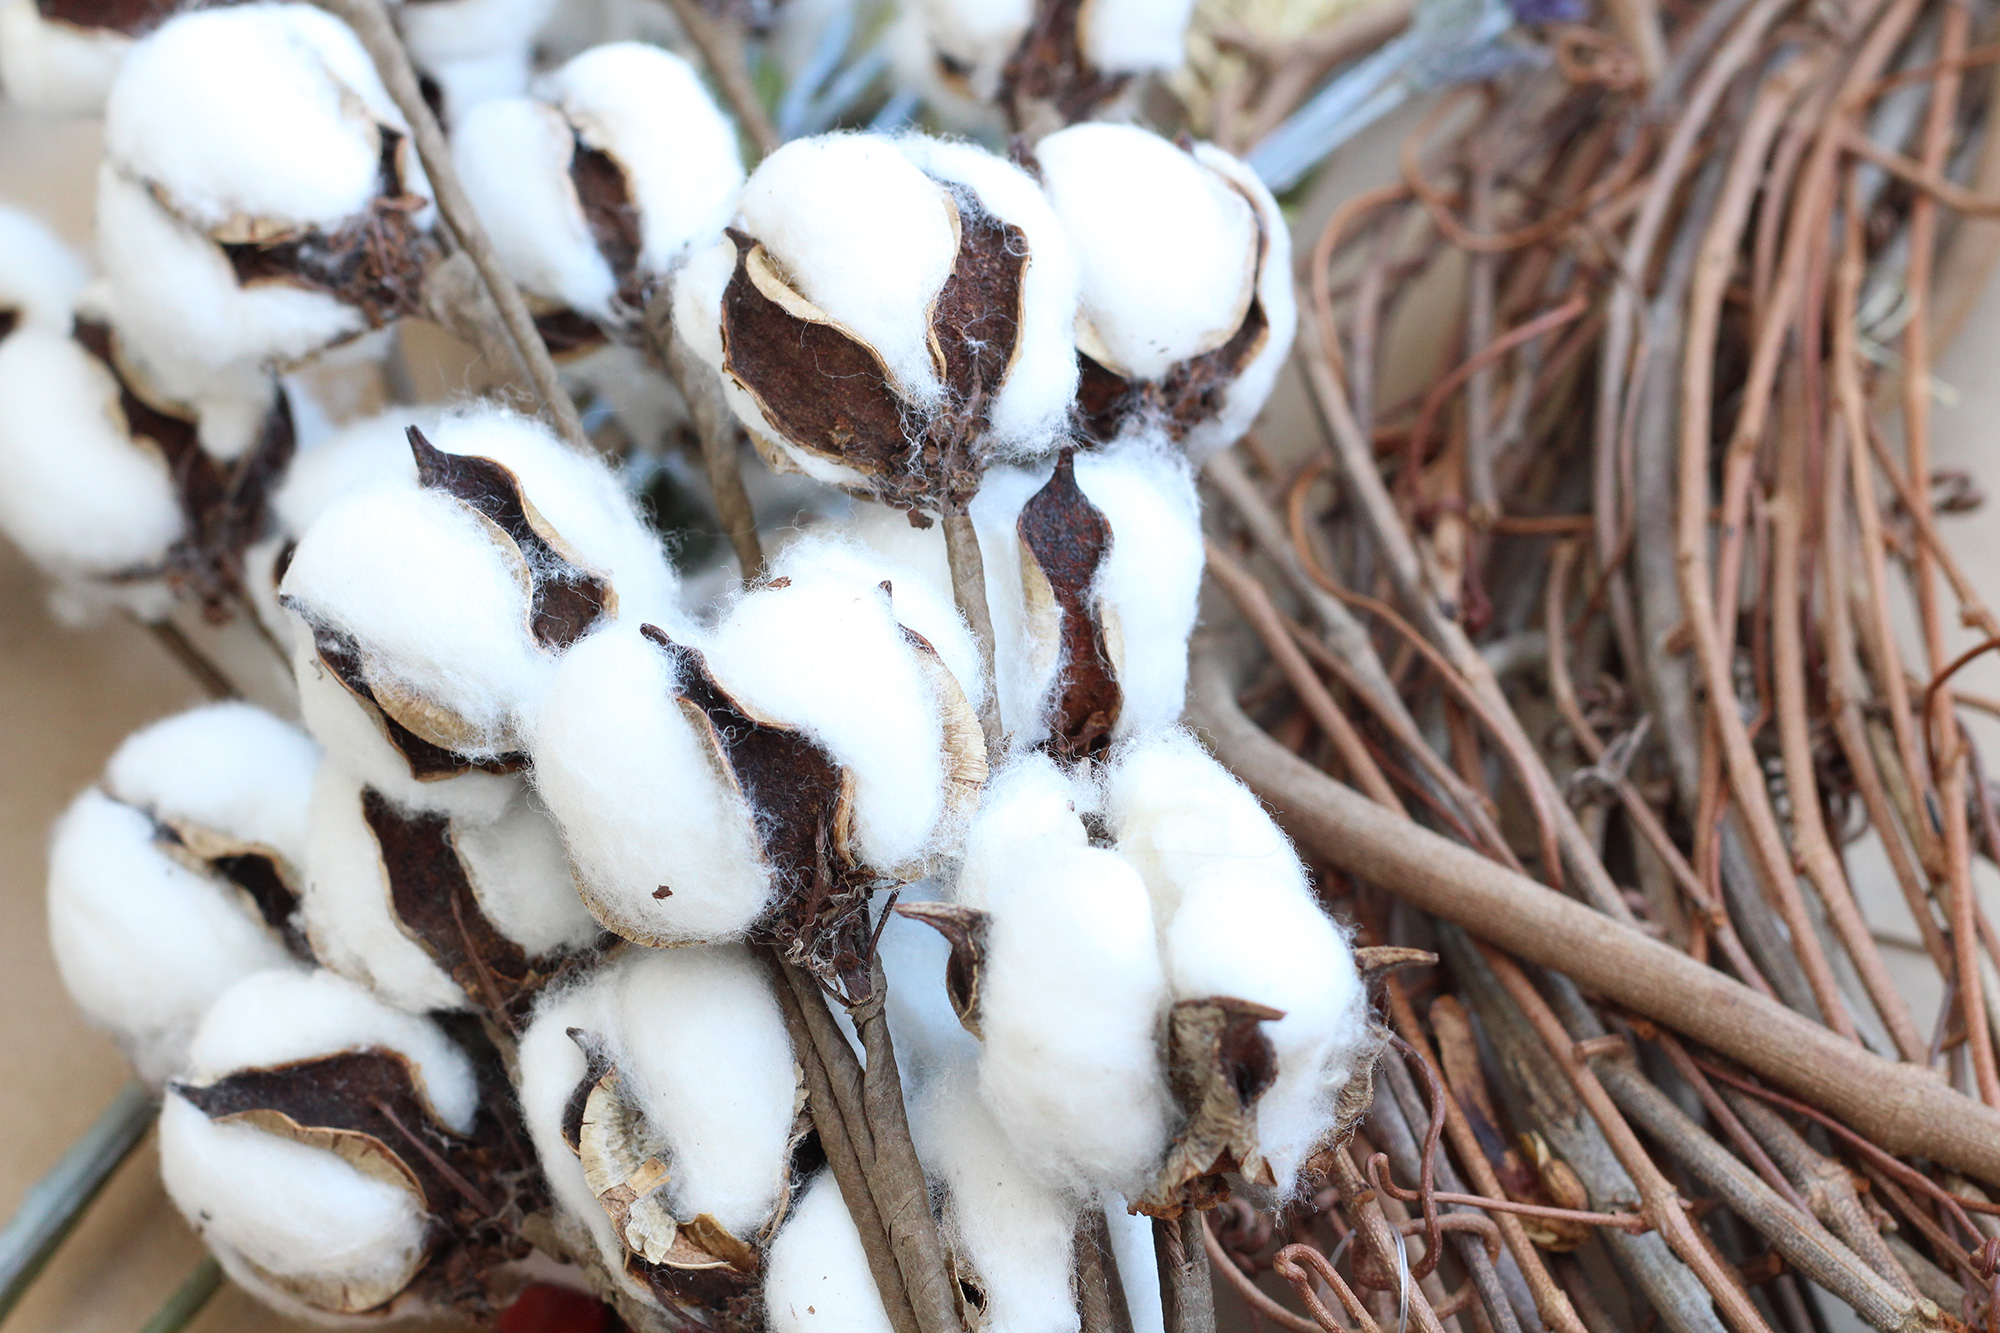 Decorating with raw cotton is fun and easy. On Lily & Val Living we are making a DIY Fall wreath using raw cotton bolls